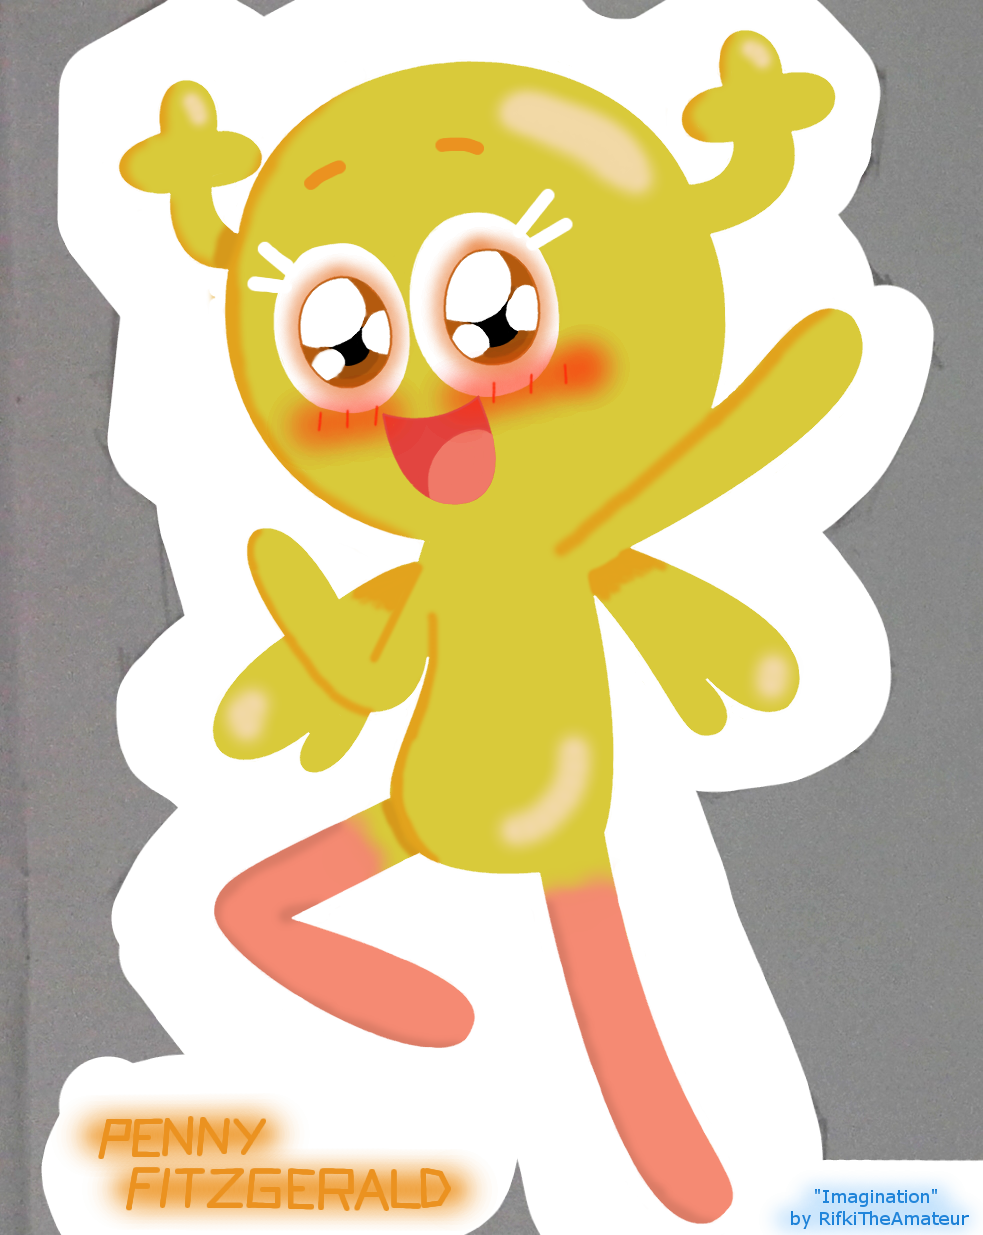 Tawog Penny Fairy Photos Download JPG, PNG, GIF, RAW, TIFF ...